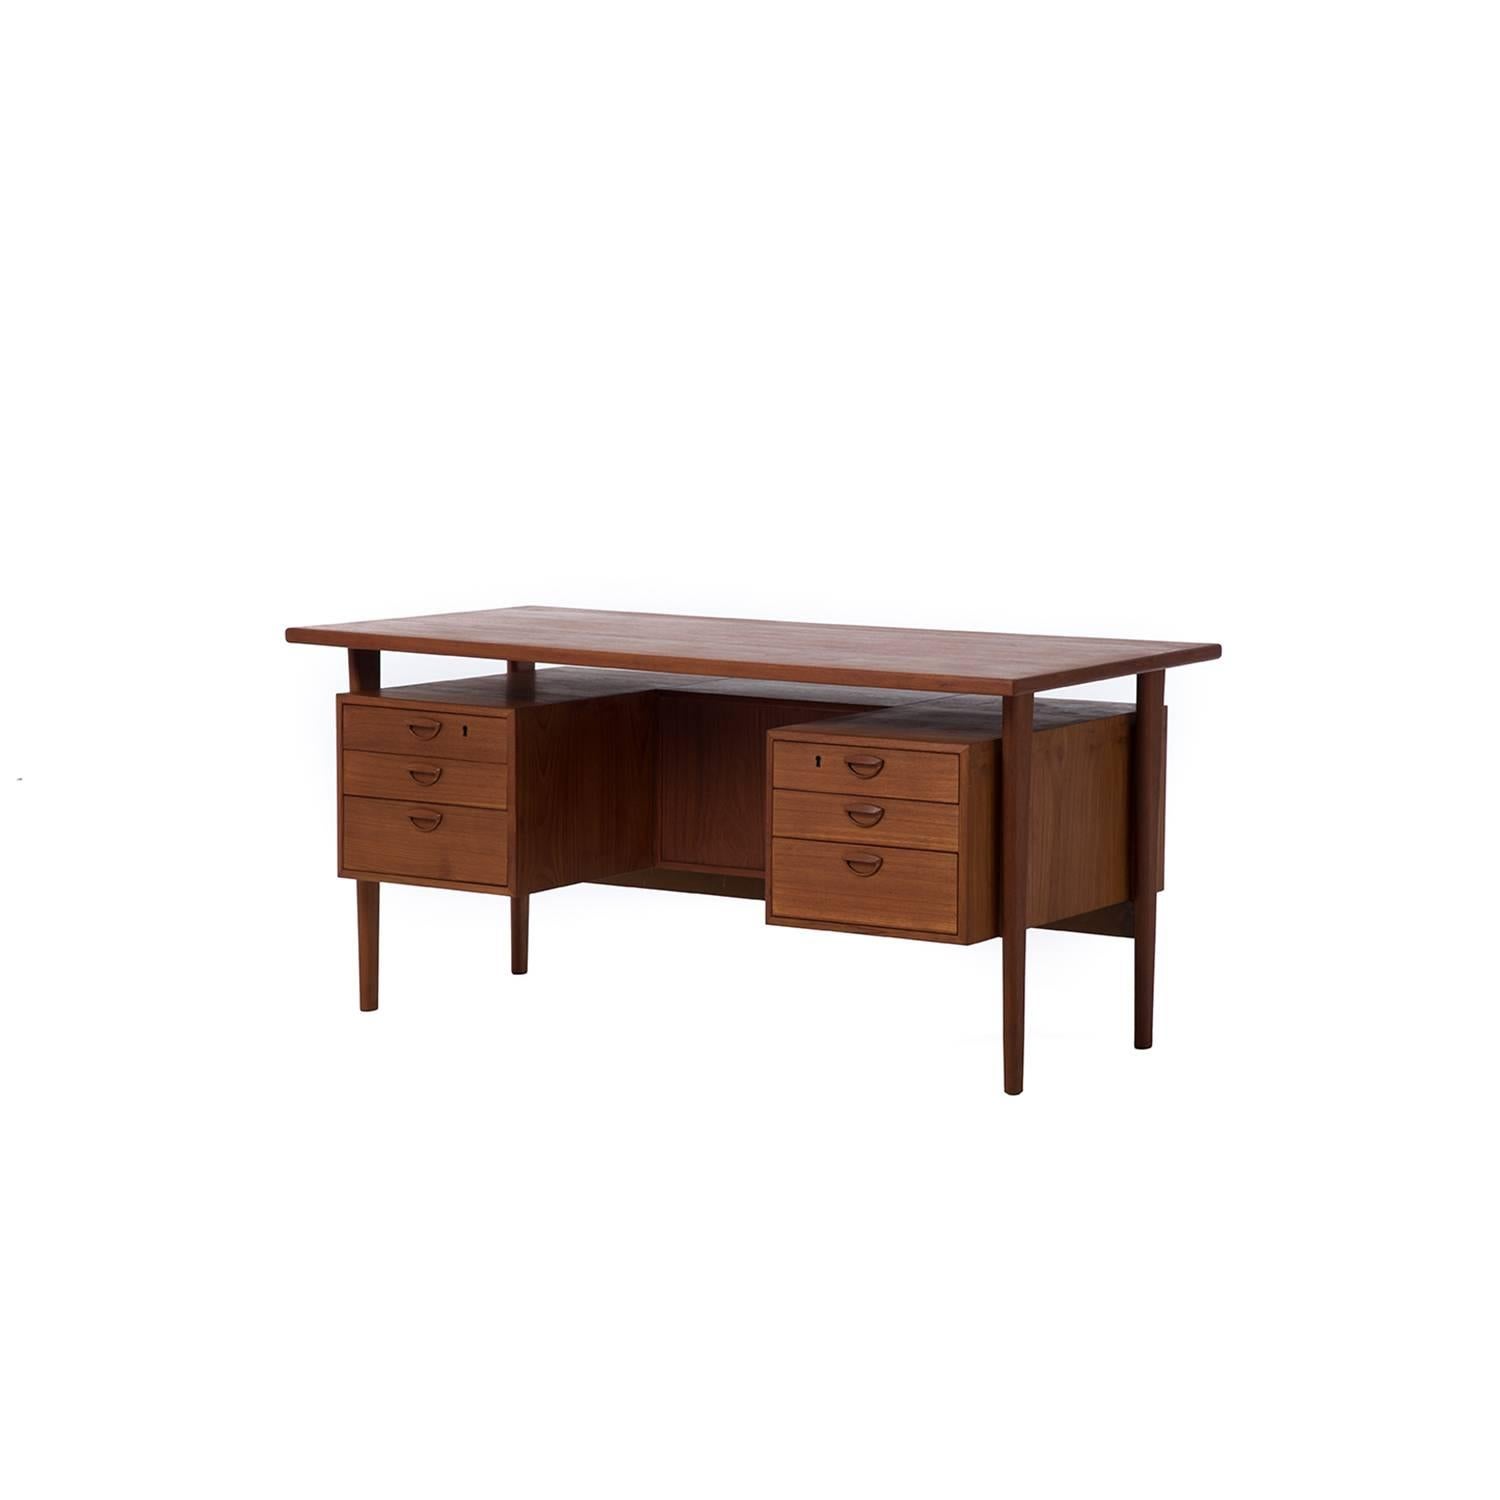 This desk has it all. The expansive work surface rests atop tapered legs from which a series of six drawers are floated. The reverse side includes three open shelves for storage/display.